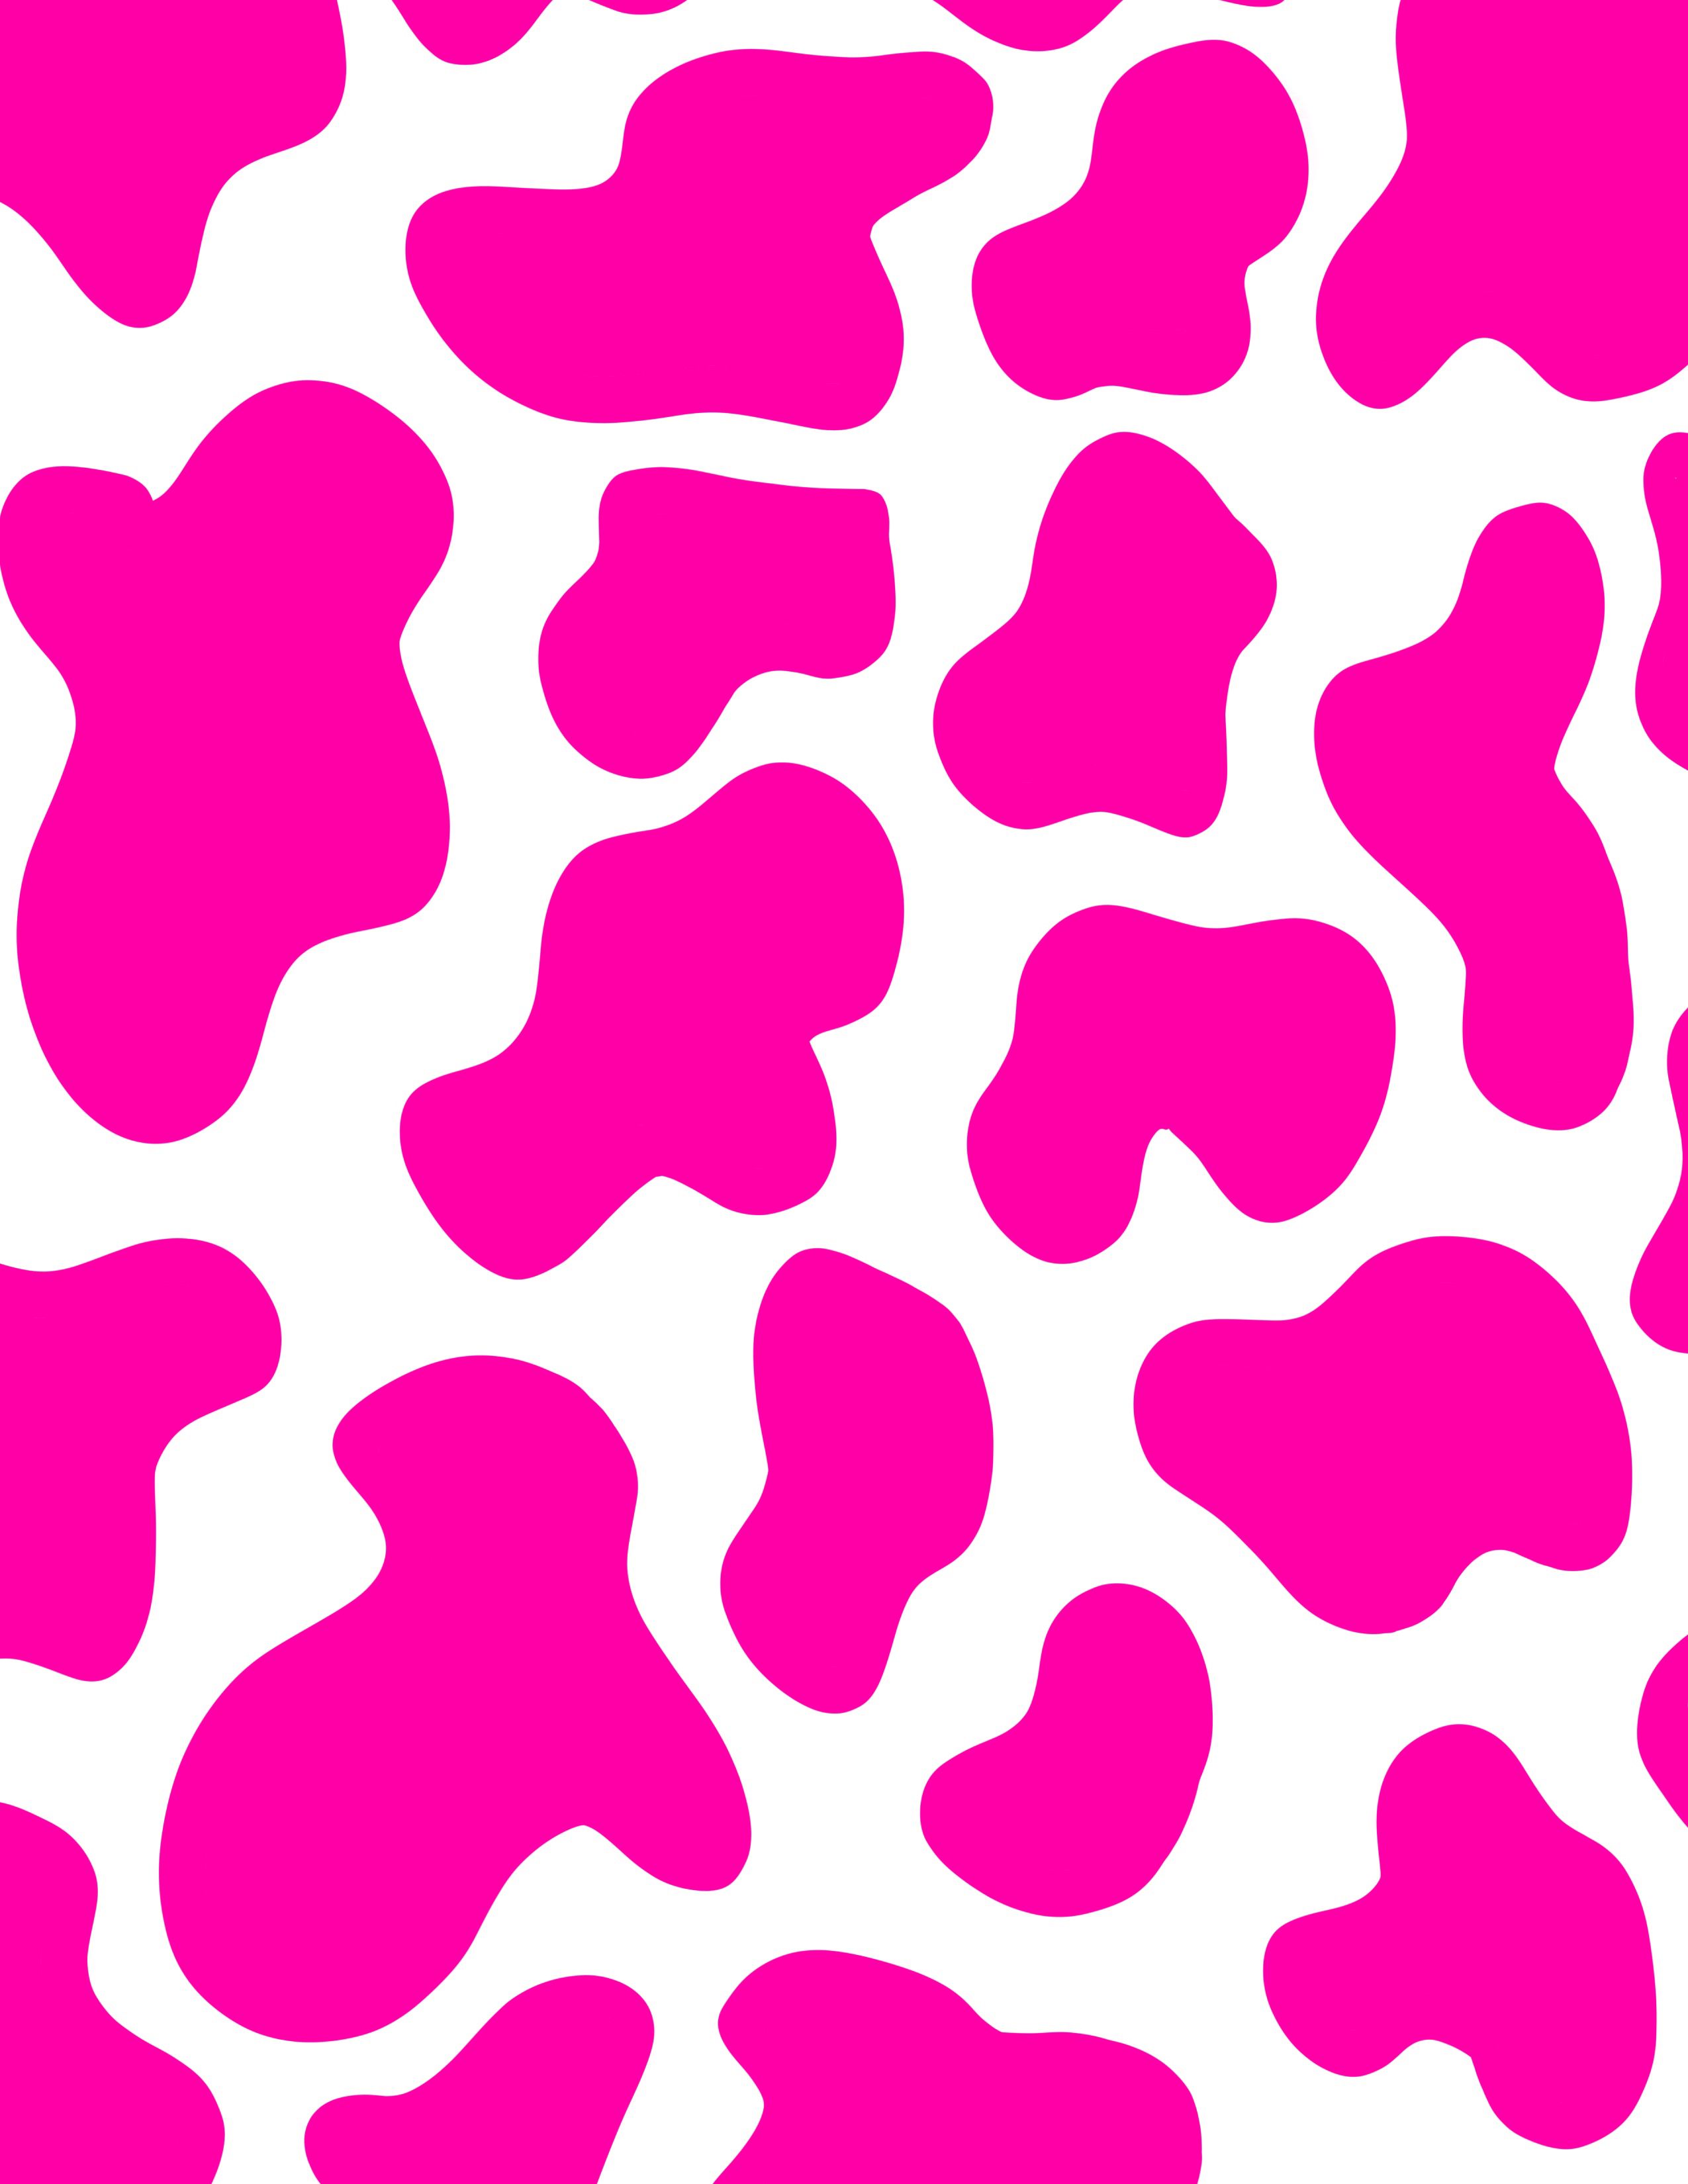 Pink cow print wallpapers.